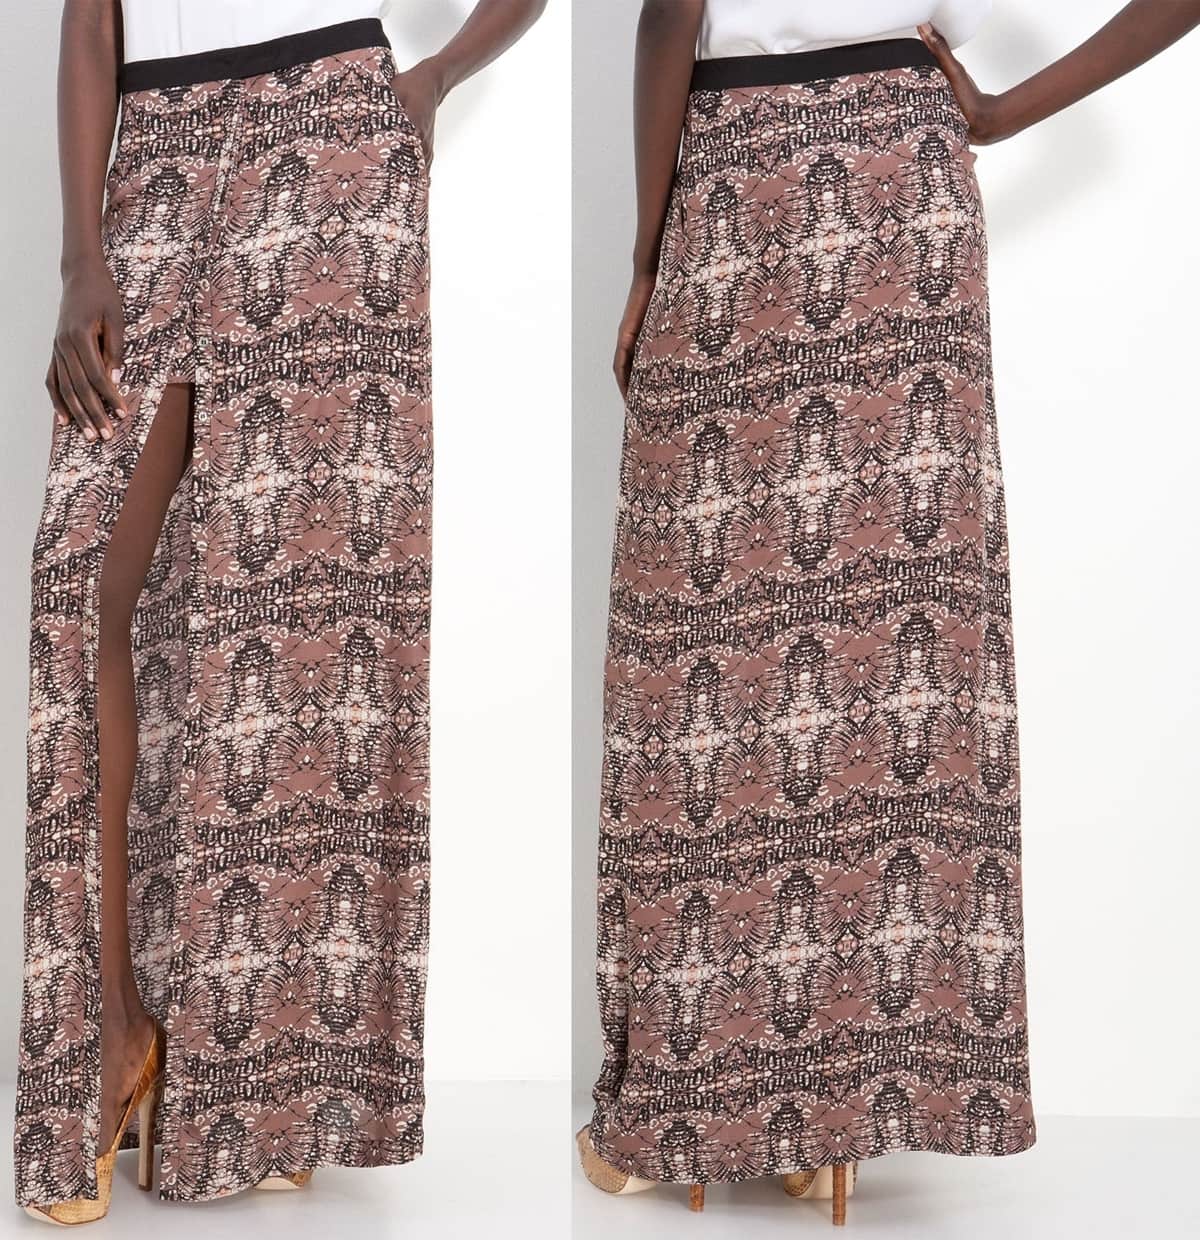 A band of grosgrain ribbon tops a Batik-patterned skirt designed with a button closure that adjusts the high, flirty front slit